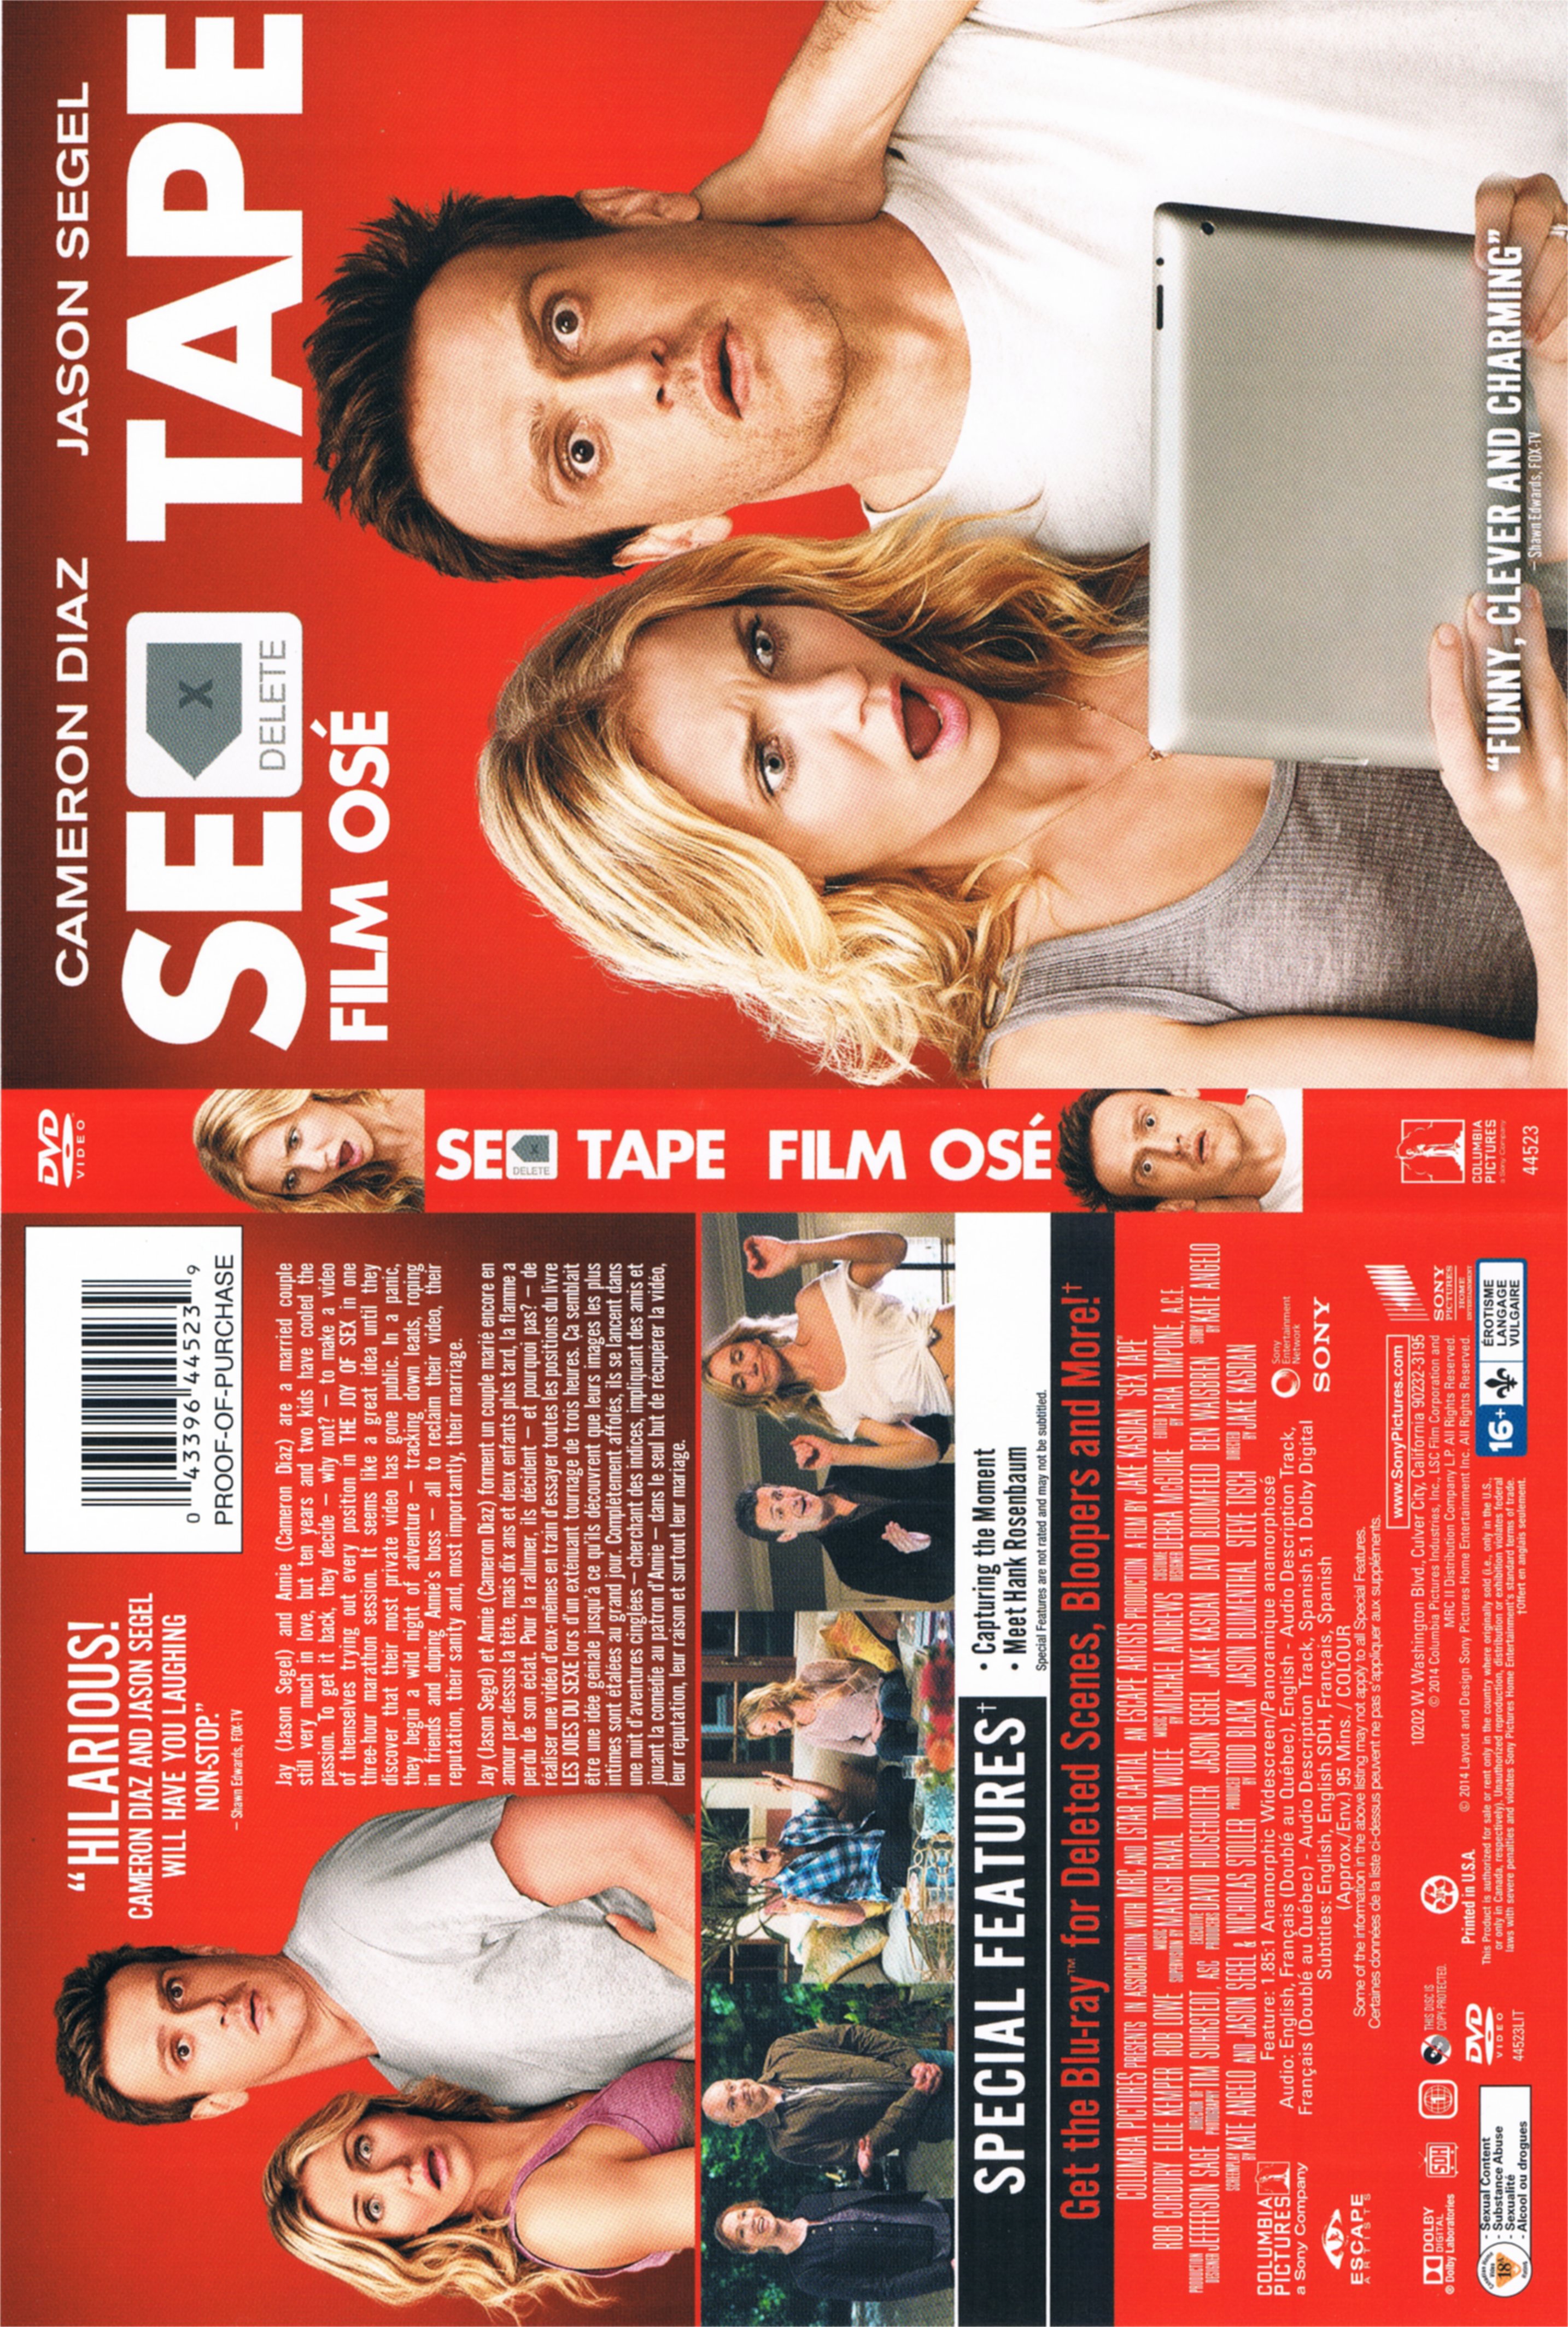 Jaquette DVD Film Os - Sex tape (Canadienne)